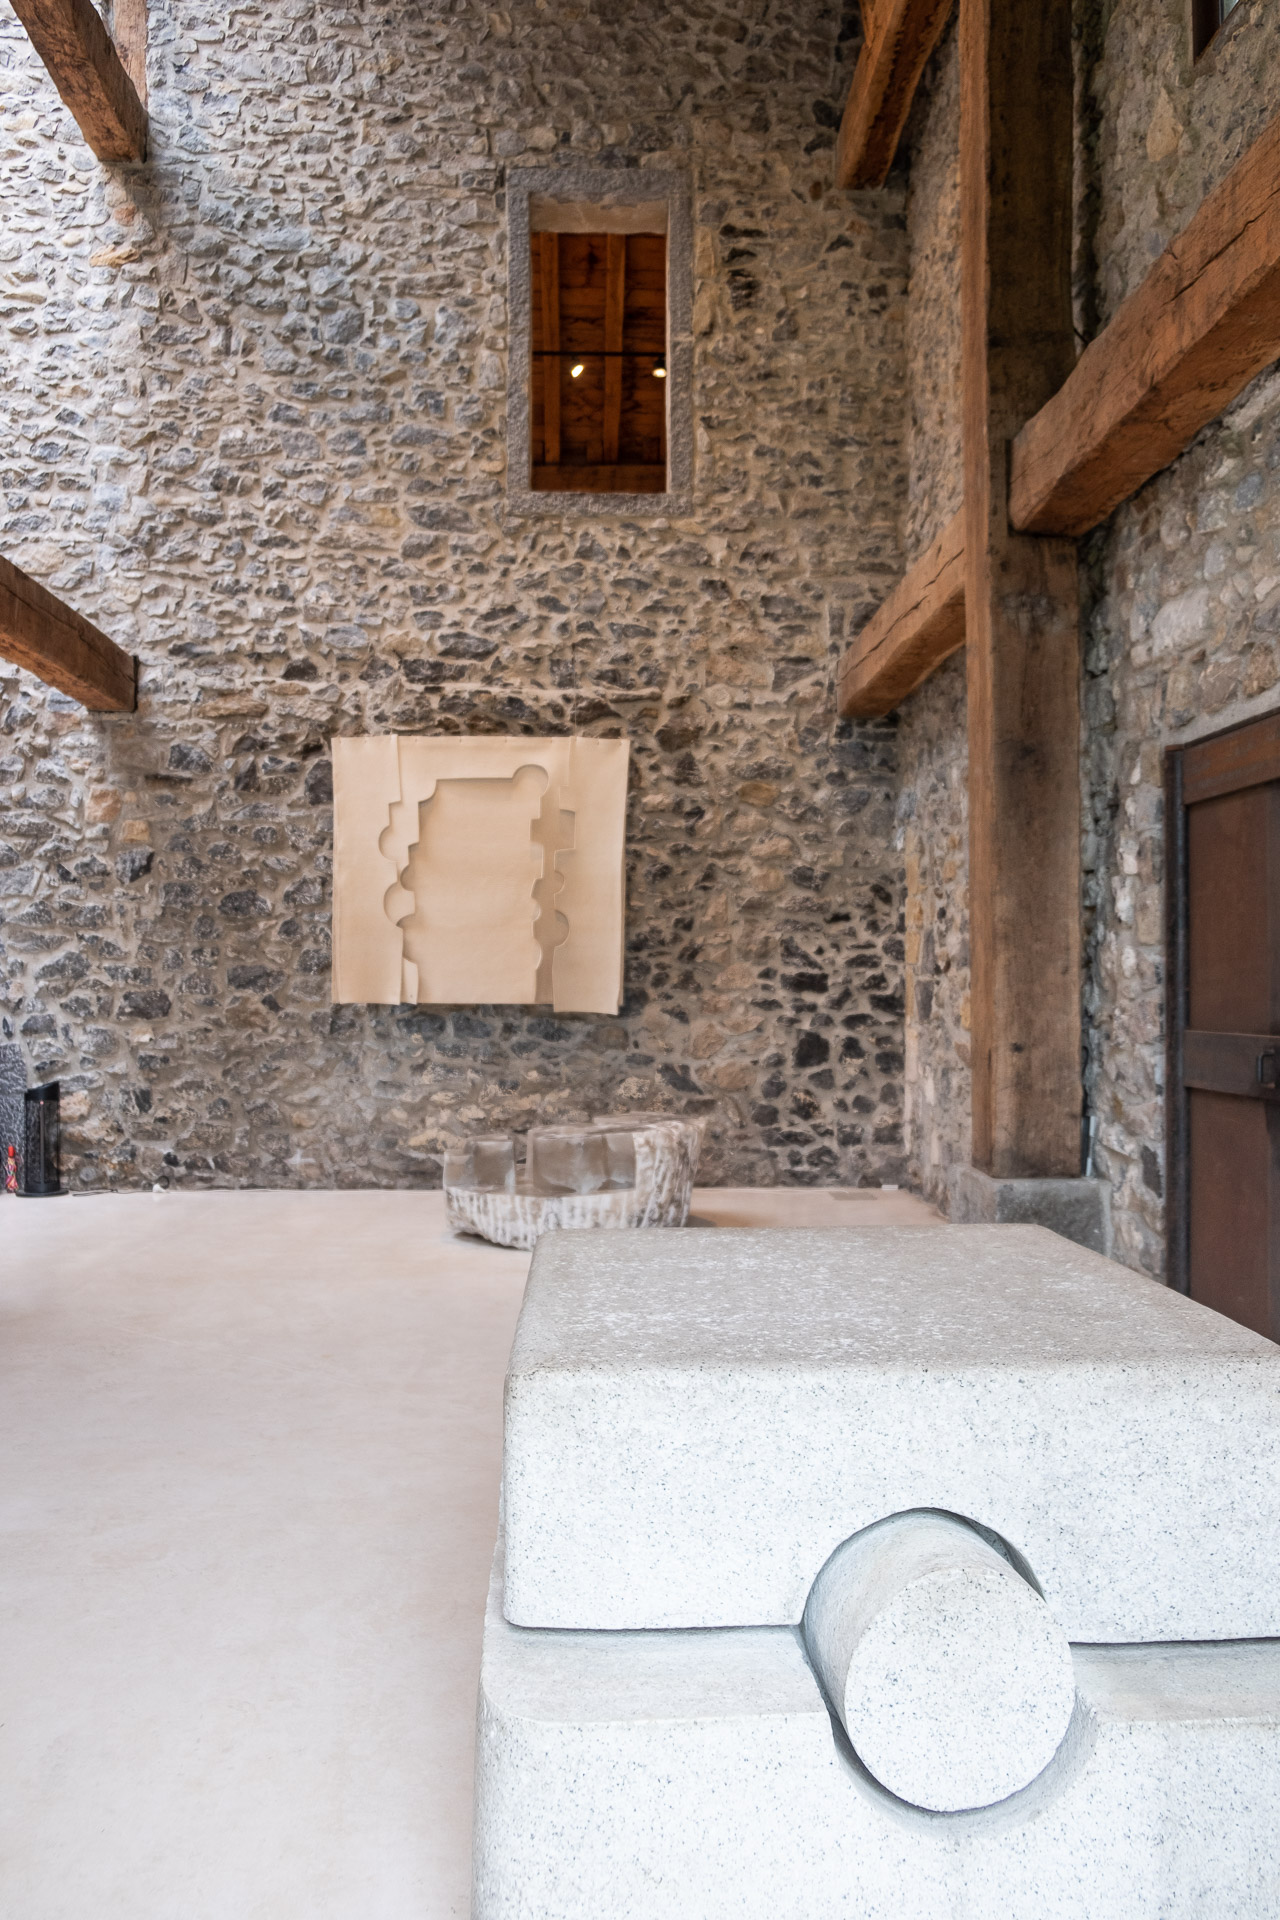 details from inside the Chillida Leku museum